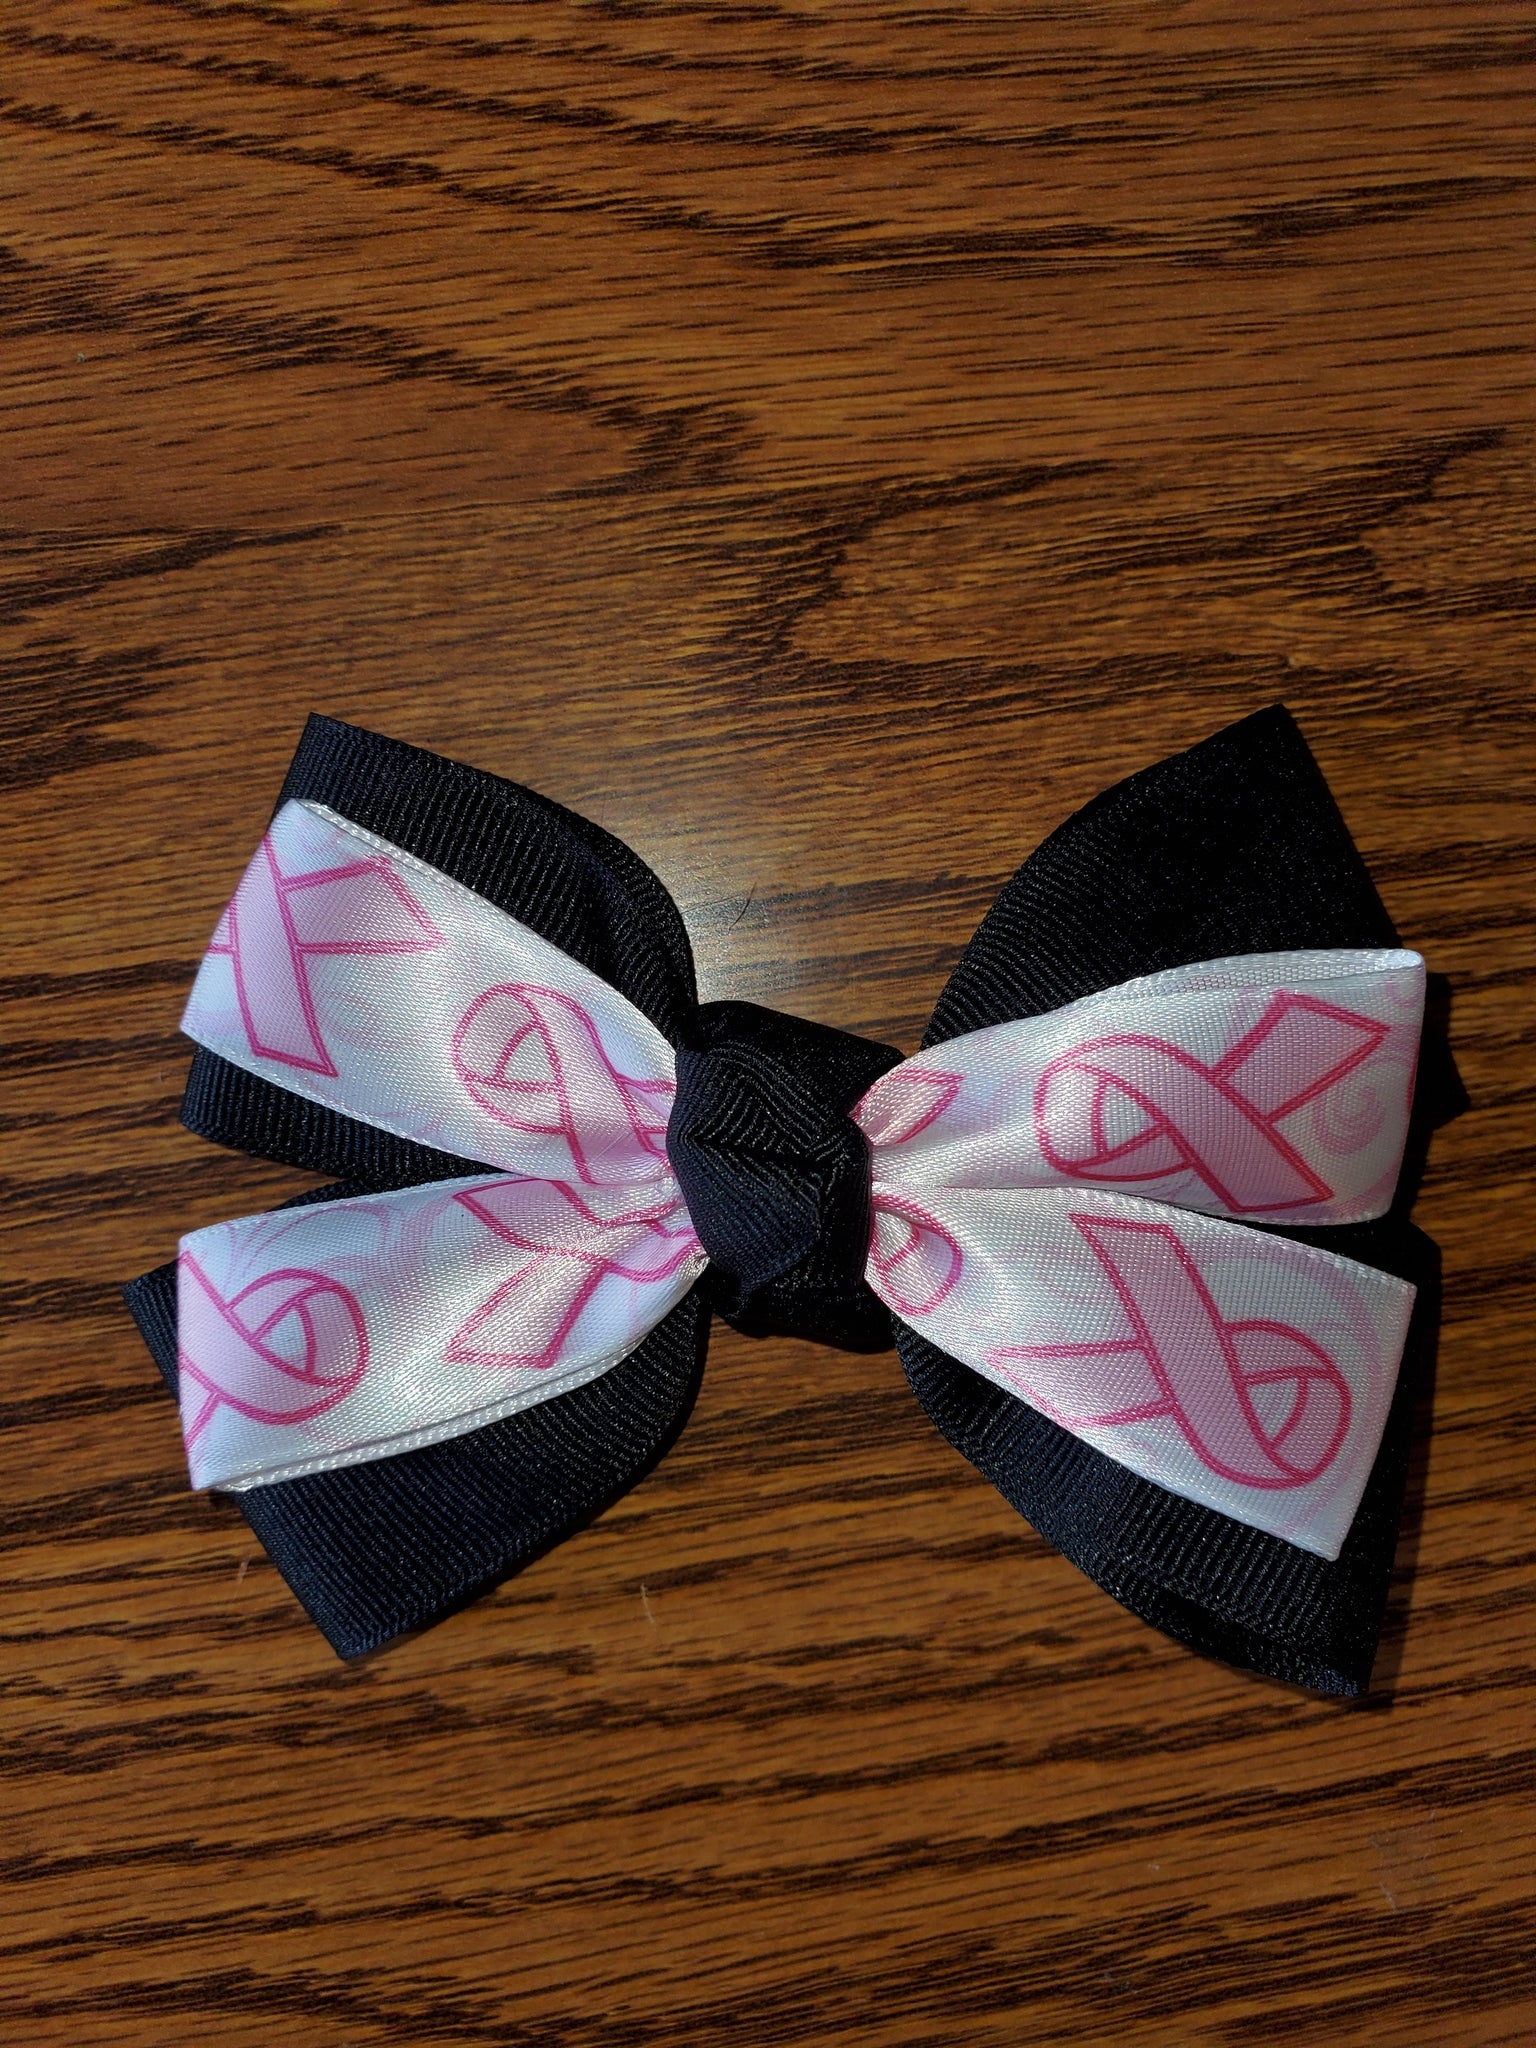 Black/White/Pink Breast Cancer Awareness Hair Bow/Hair Accessory